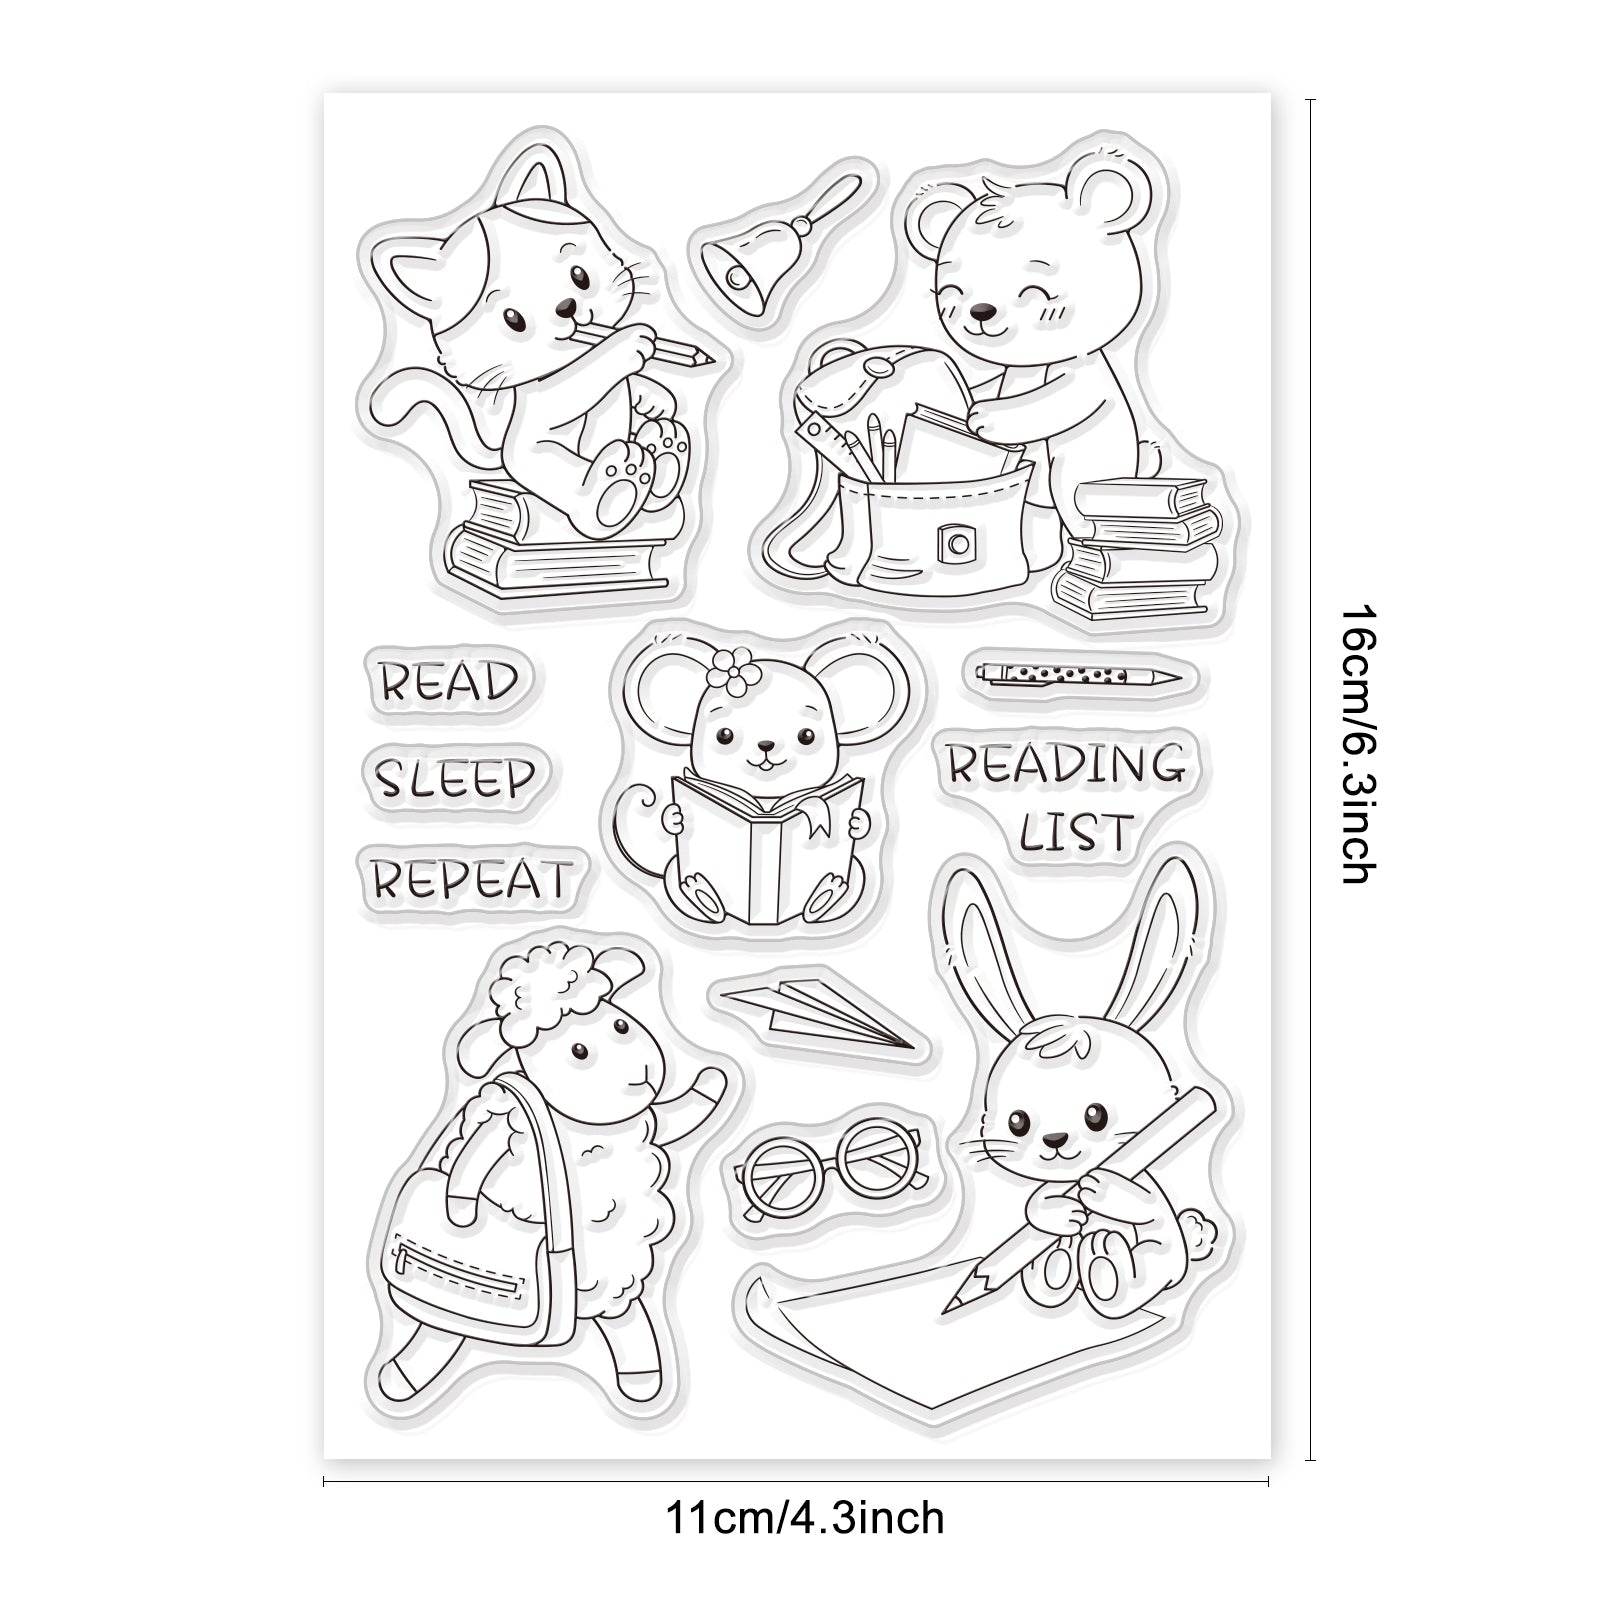 Globleland Kitten, Bear, Rabbit, Mouse, Lamb, Learning, Reading, Schoolbag, School, Brush Clear Silicone Stamp Seal for Card Making Decoration and DIY Scrapbooking